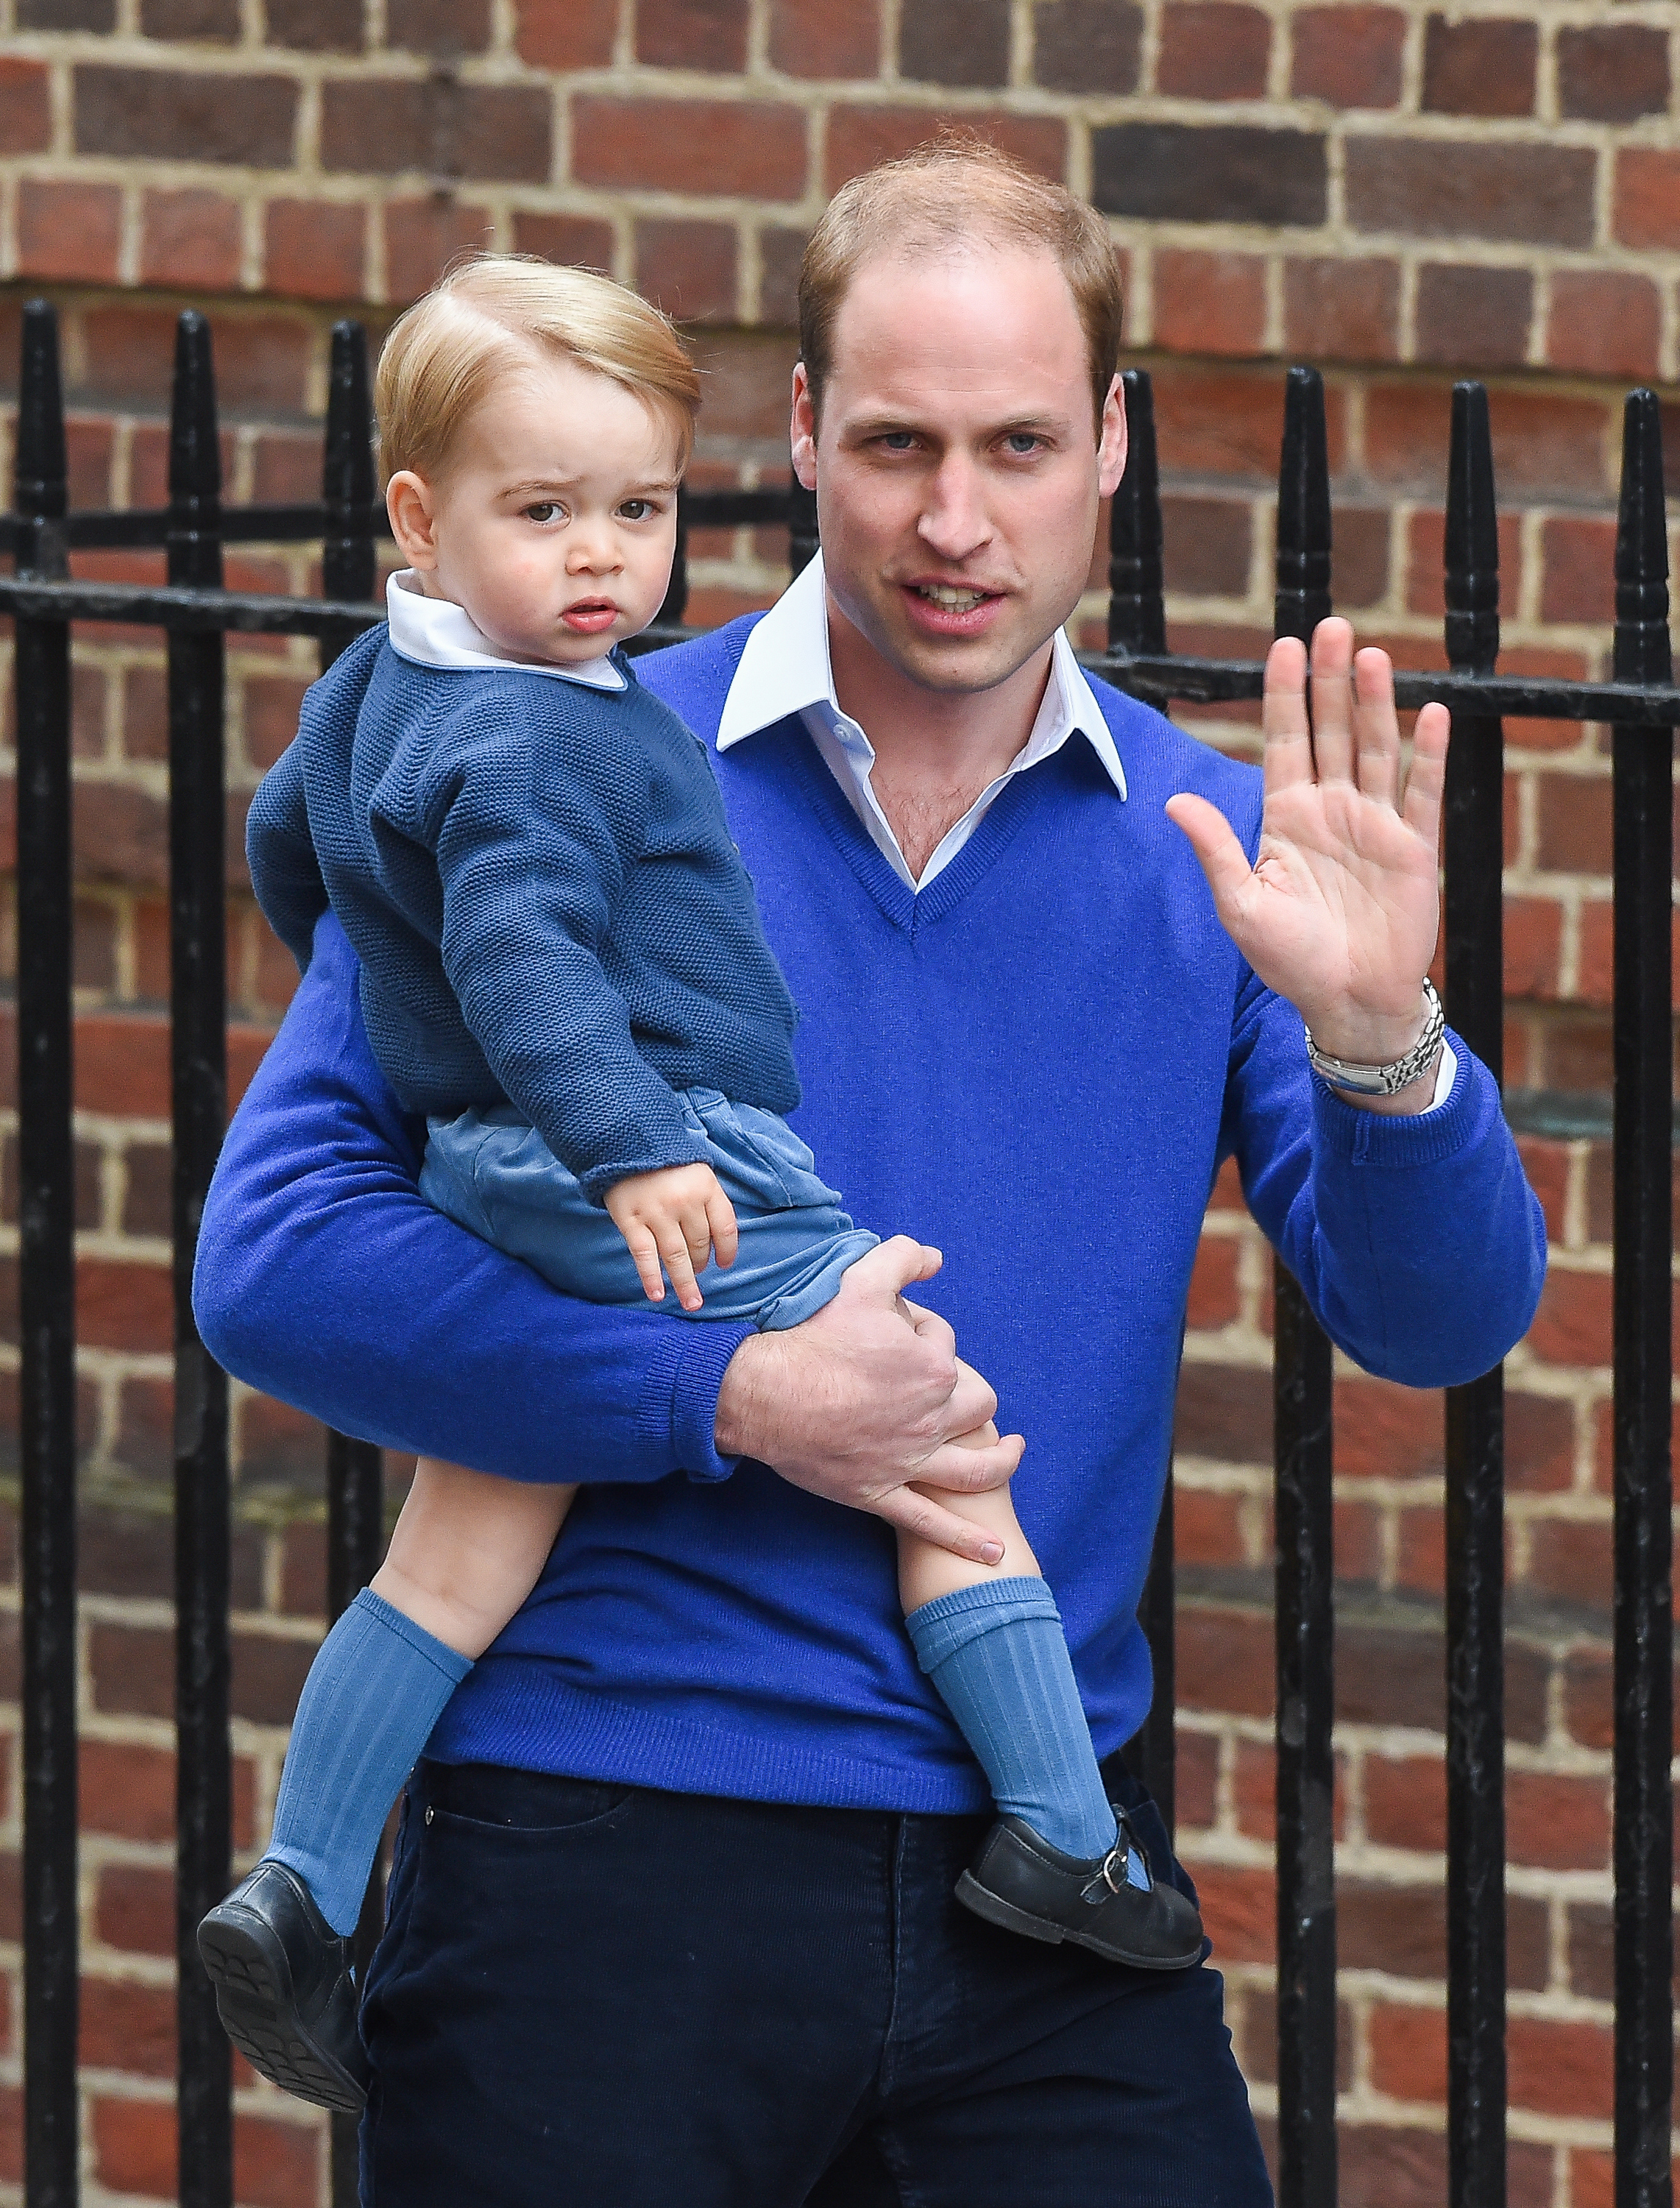 Prince William, Duke of Cambridge arrives with Prince George of Cambridge at the Lindo Wing following the birth his second child at St Mary's Hospital on May 2, 2015 in London. (Samir Hussein—WireImage/Getty Images)